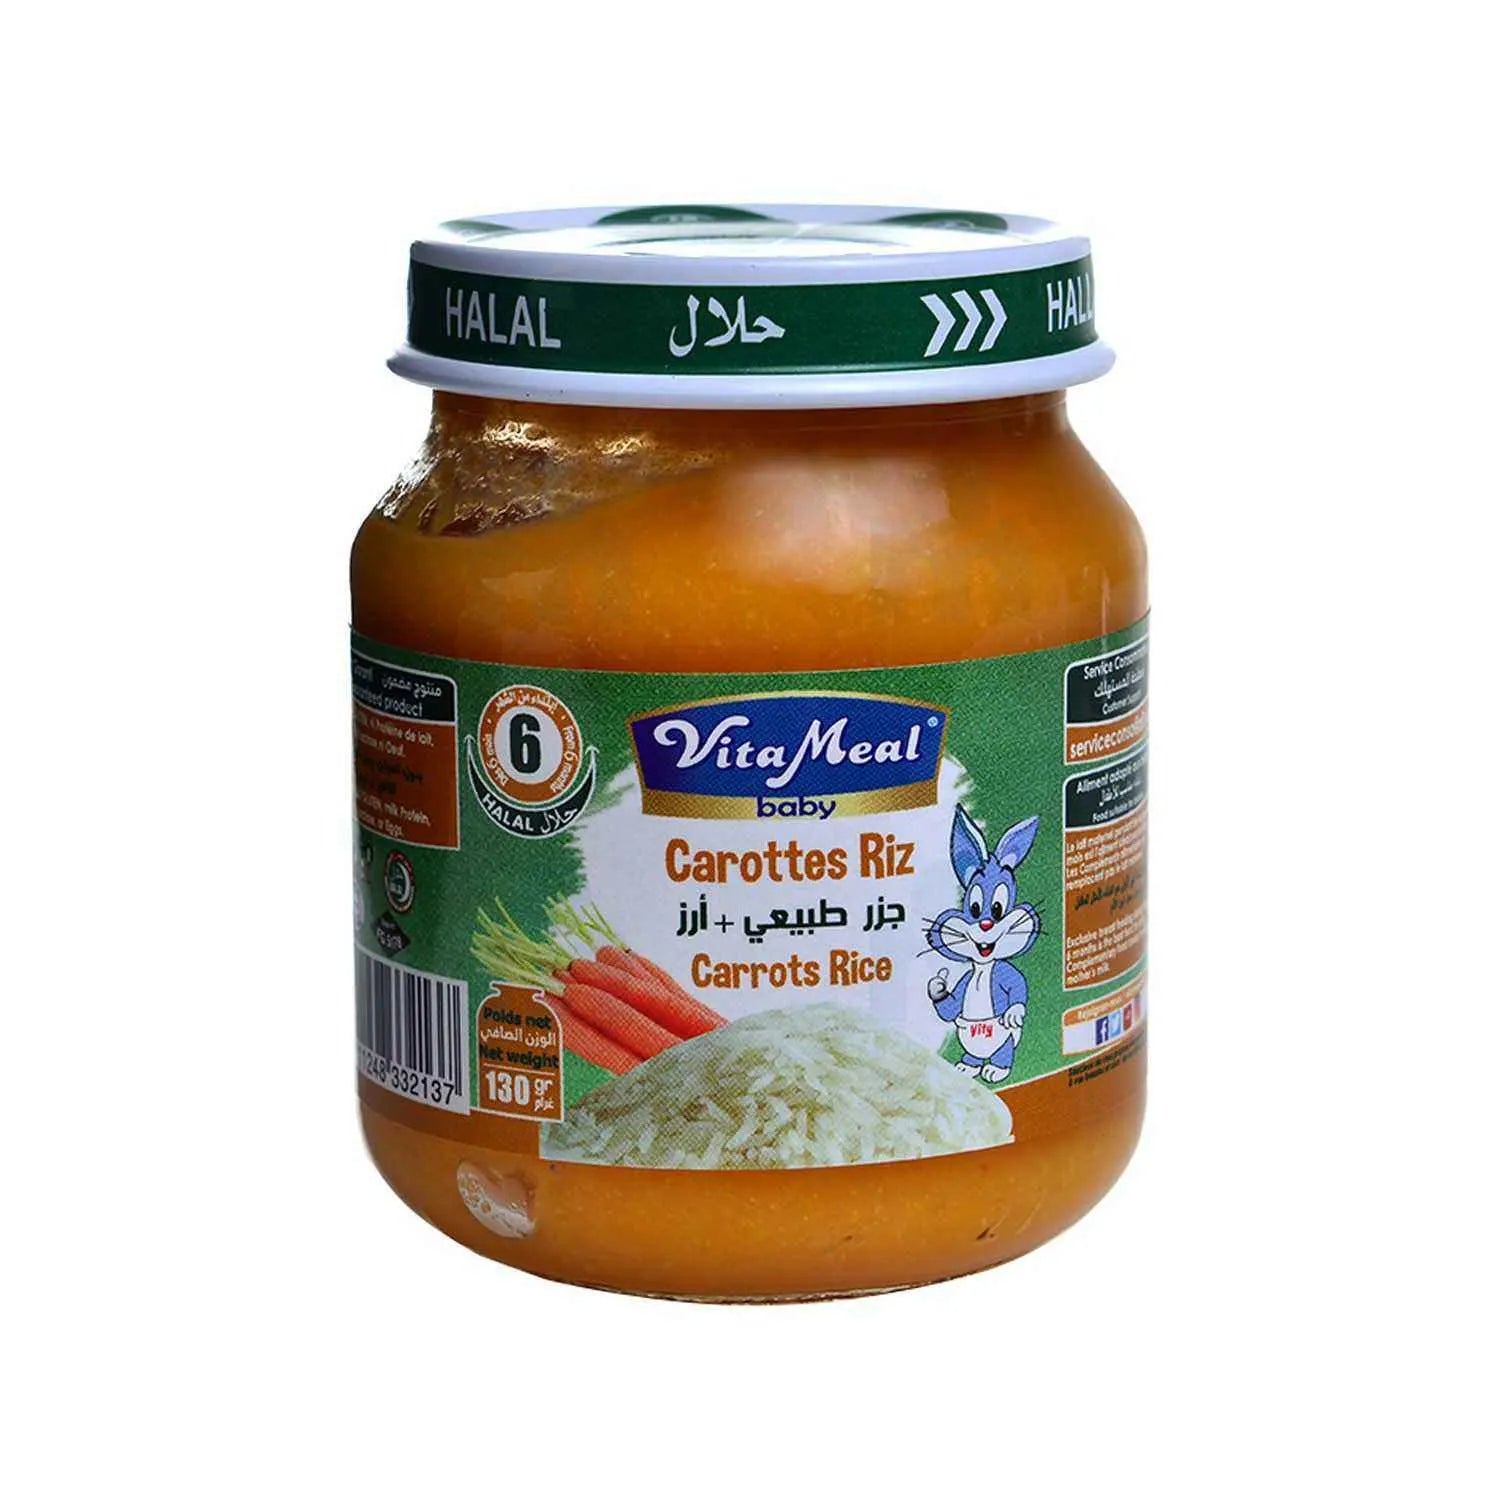 Small Pot Carrots and Rice Gluten and Lactose Free Vitameal Baby 130g 